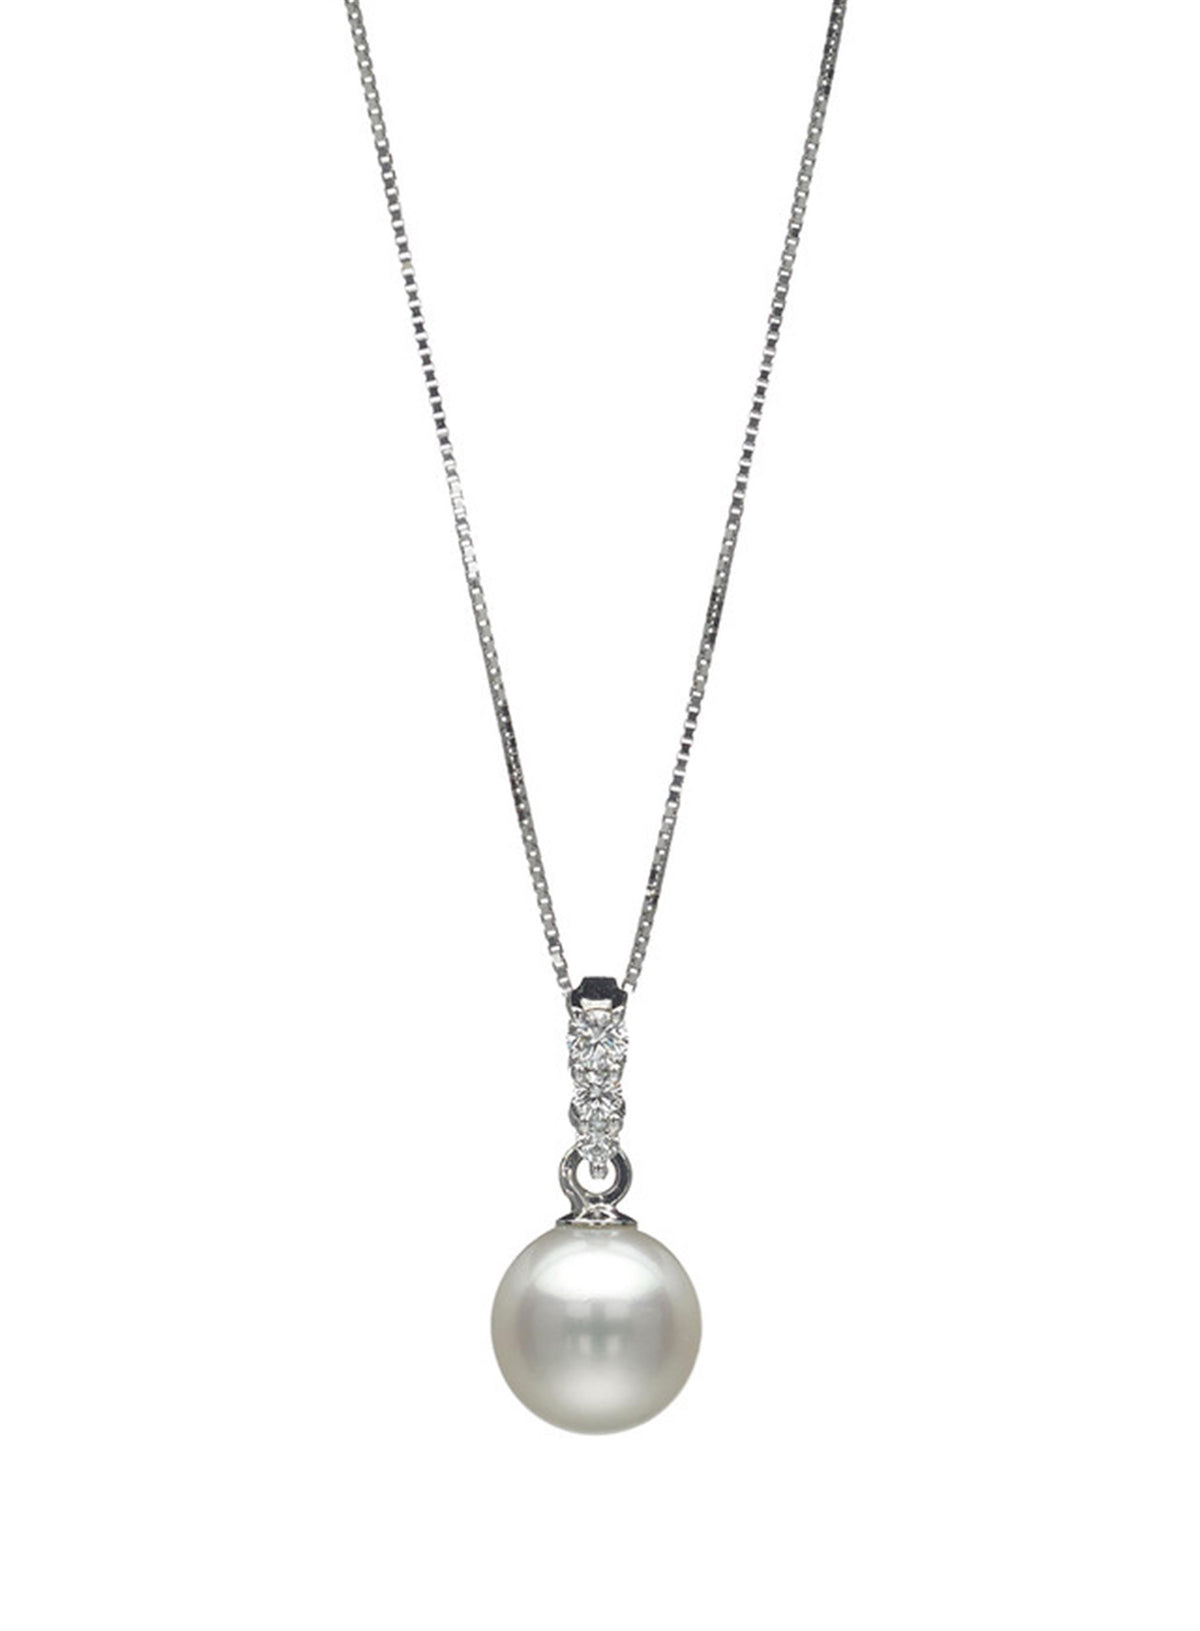 14K White Gold  Drop Pendant with 8mm Akoya Cultured Pearl